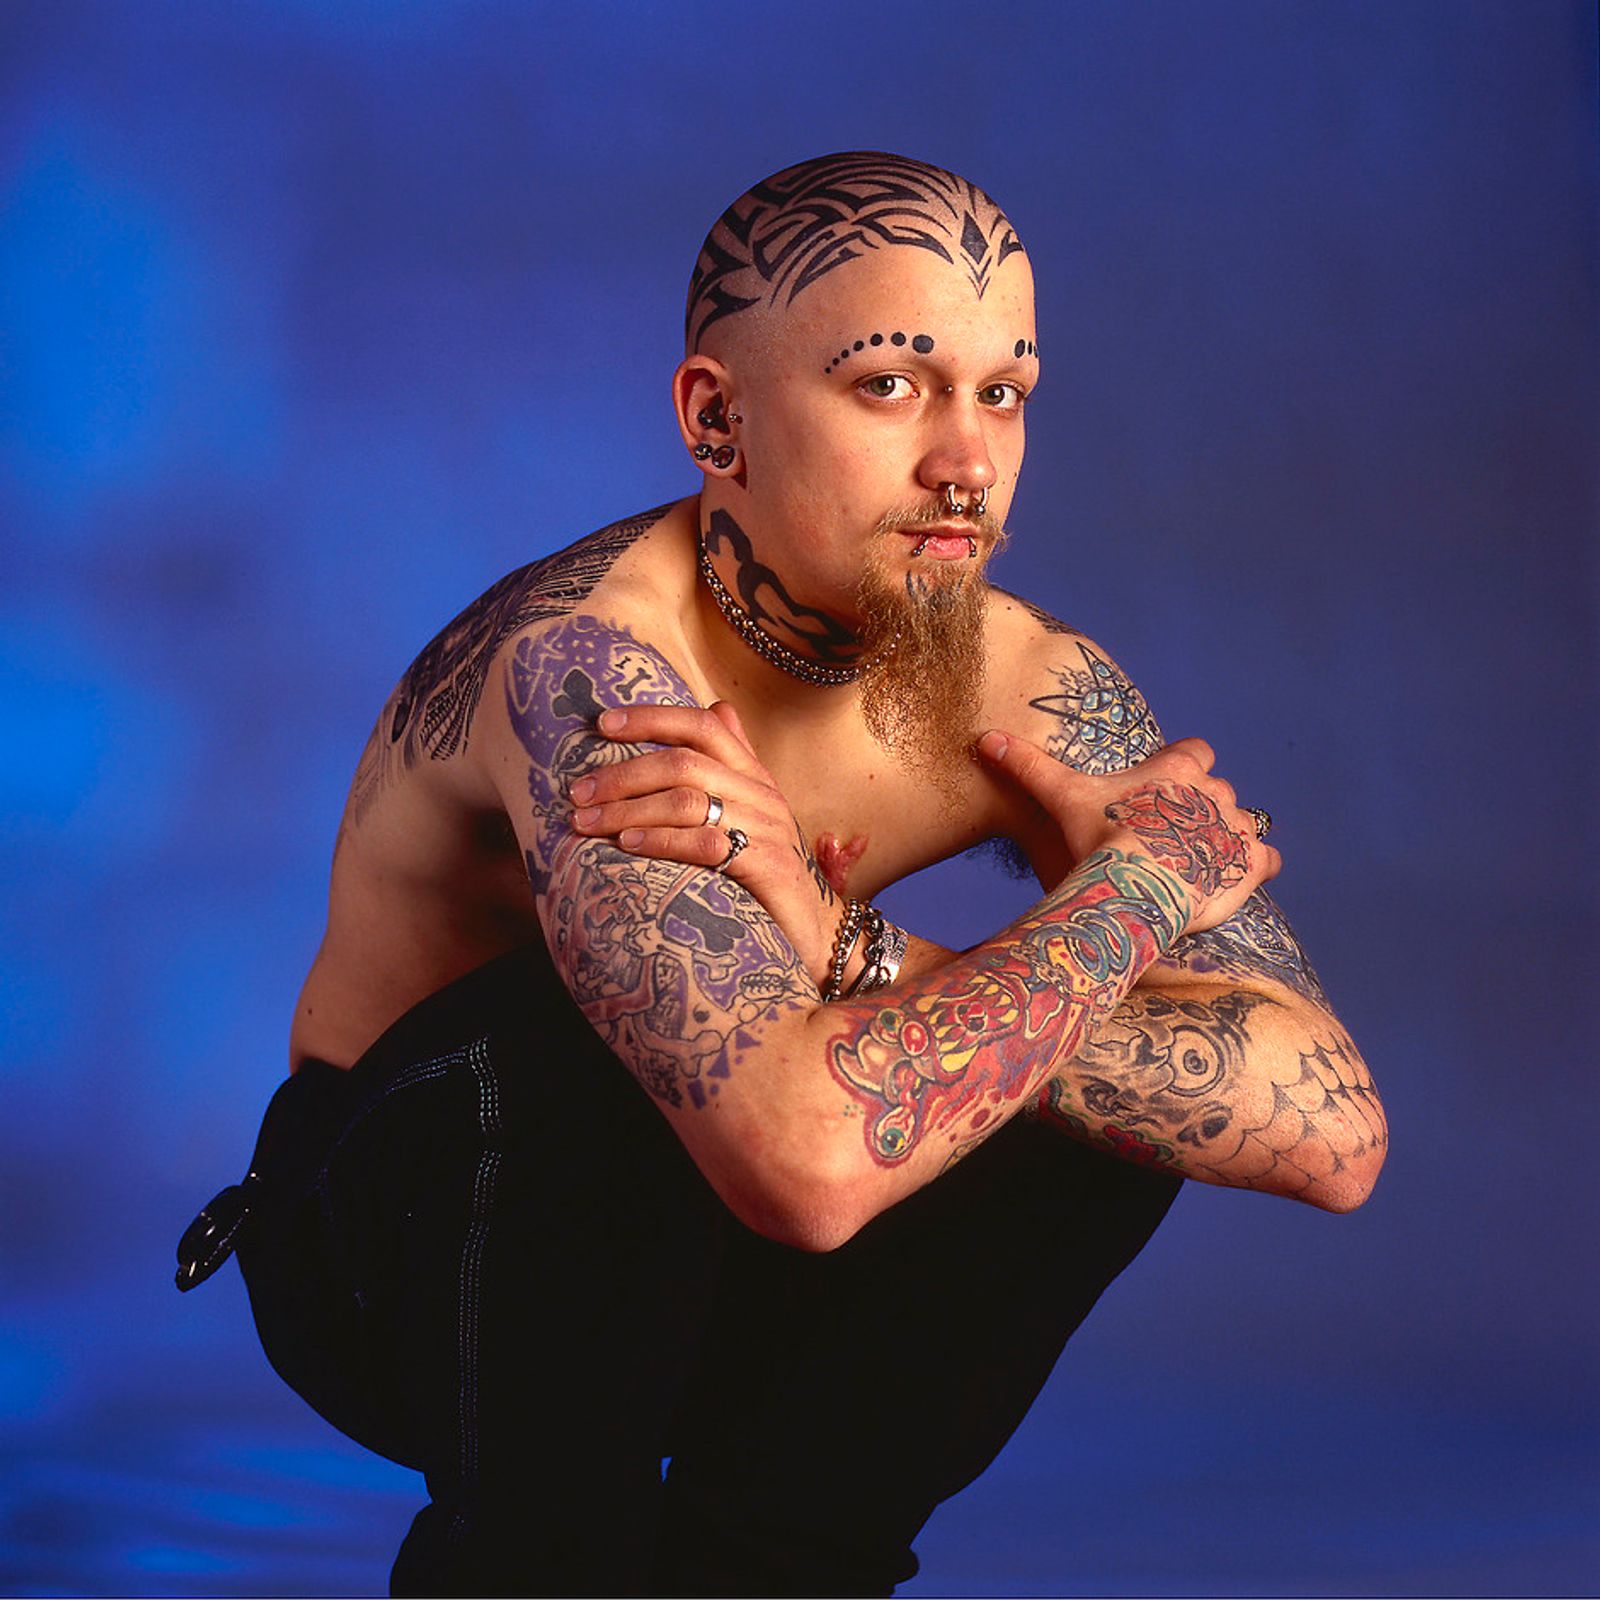 © Steven Edson - Young man with beard has many tattoo's and piercings across his body.